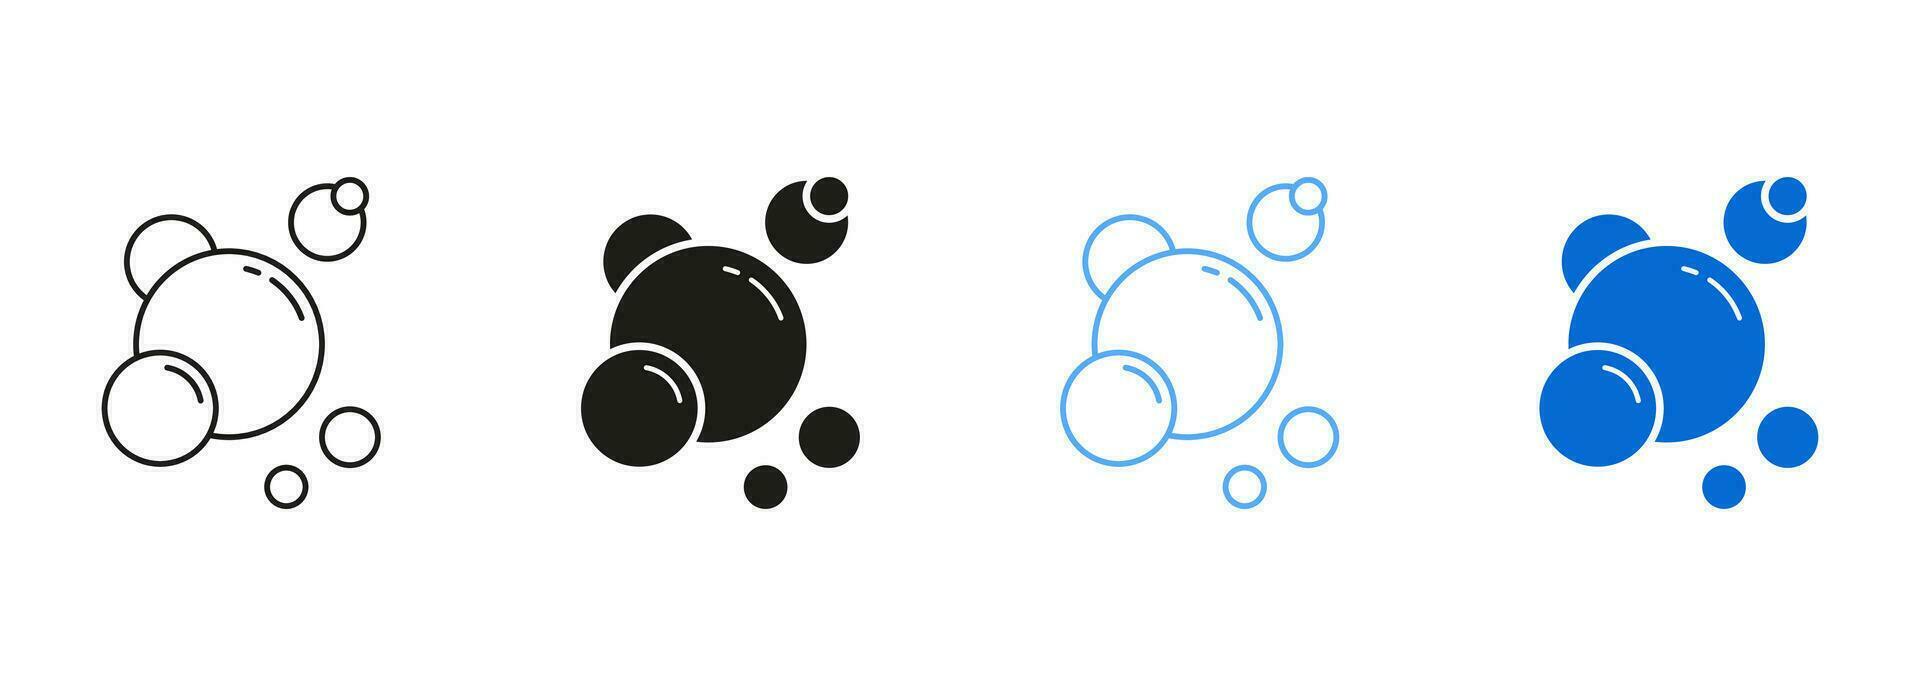 Clear Soda Drops Line and Silhouette Icon Set. Soap Symbol Collection. Fizzy Drink, Water Bubble Black and Blue Pictogram. Sphere Foam, Aquarium. Effervescent Champagne. Isolated Vector Illustration.